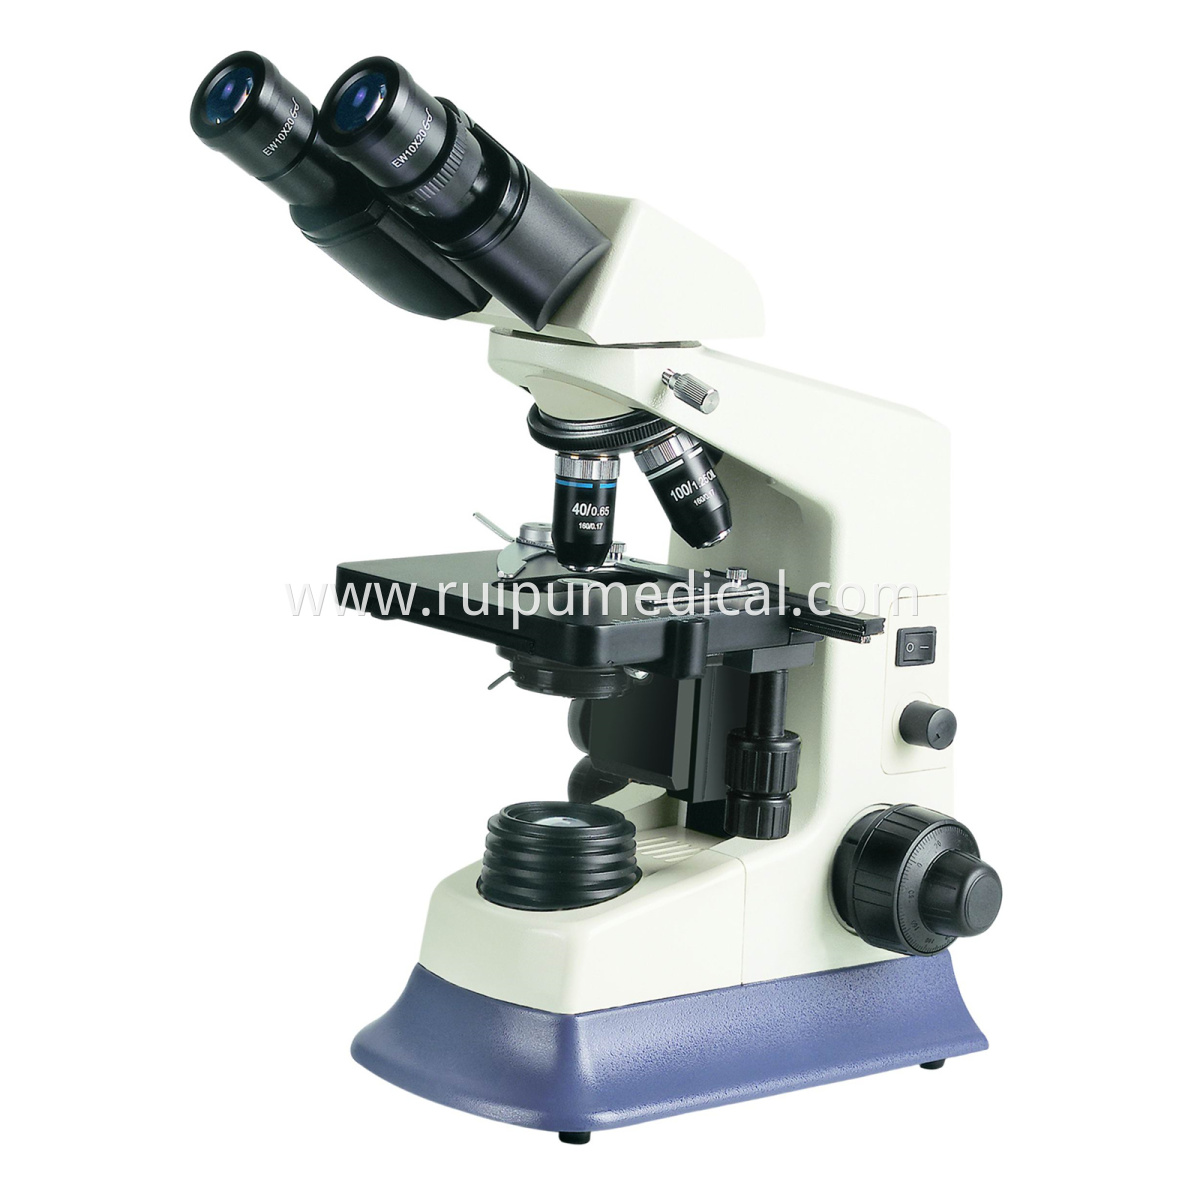 N-180M BIOLOGICAL MICROSCOPE for academic and clinical use